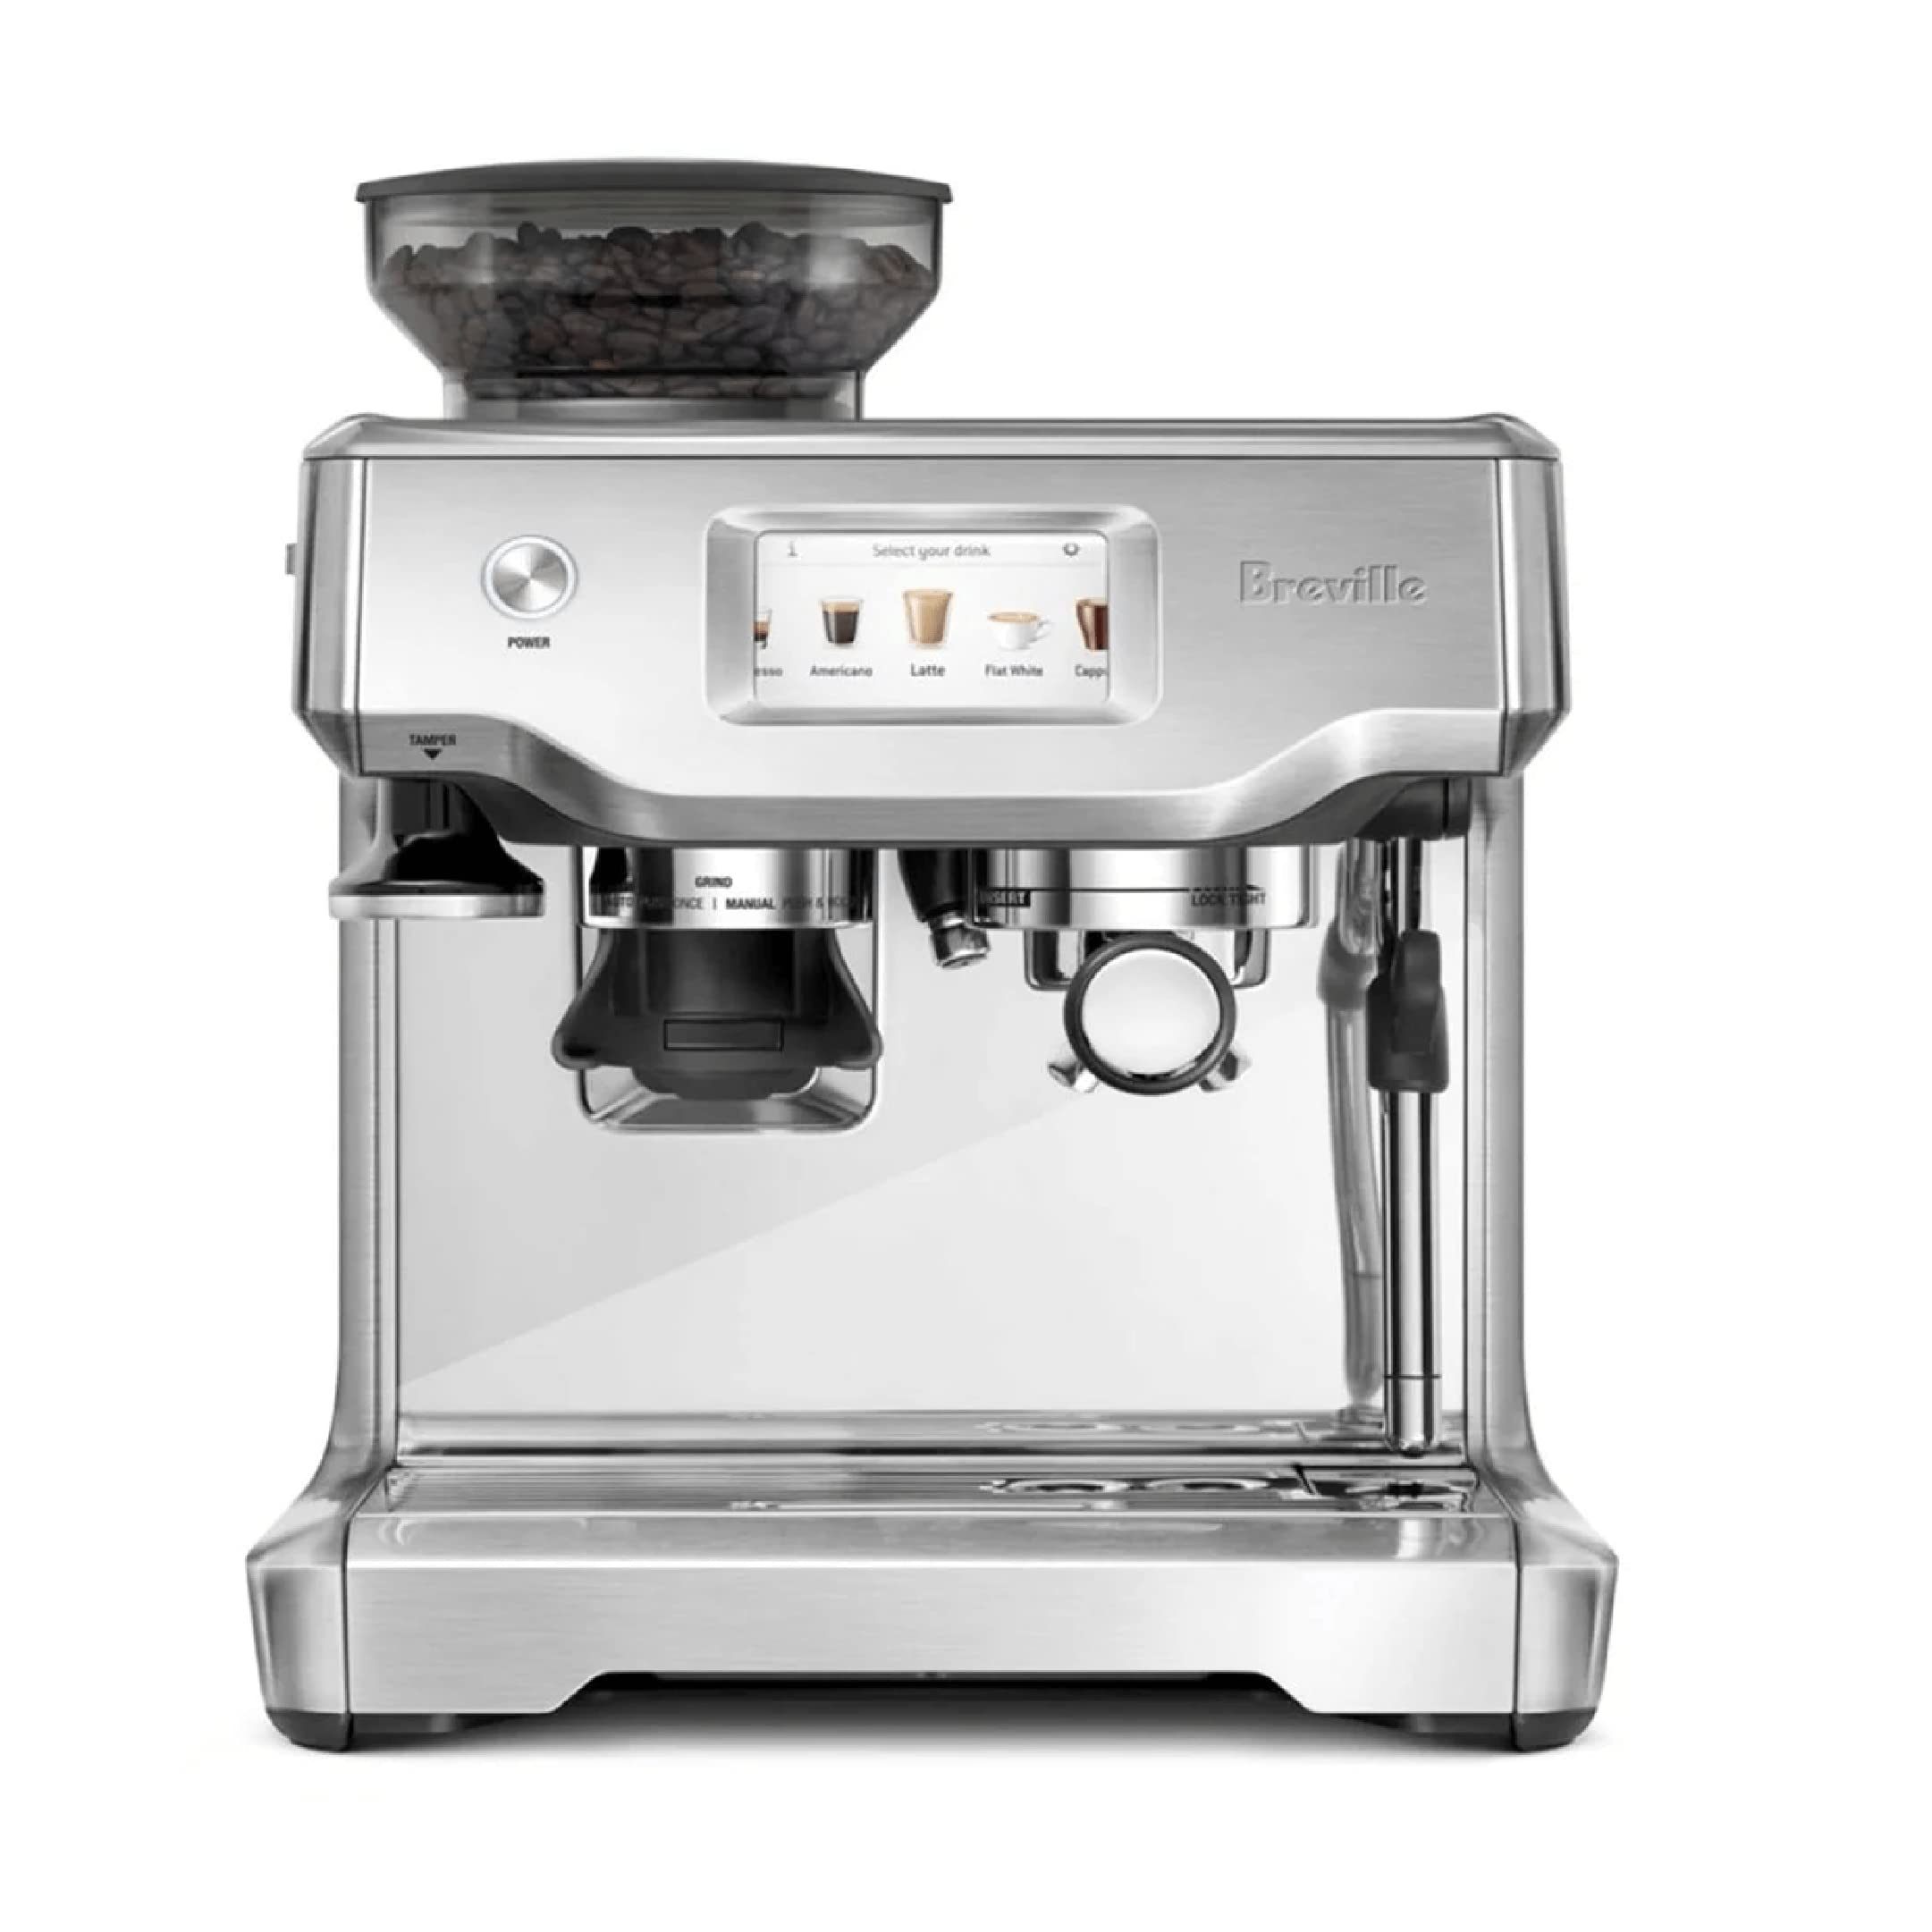 Breville Barista Touch Espresso Machine (Brushed Stainless Steel) $880 + Free Shipping